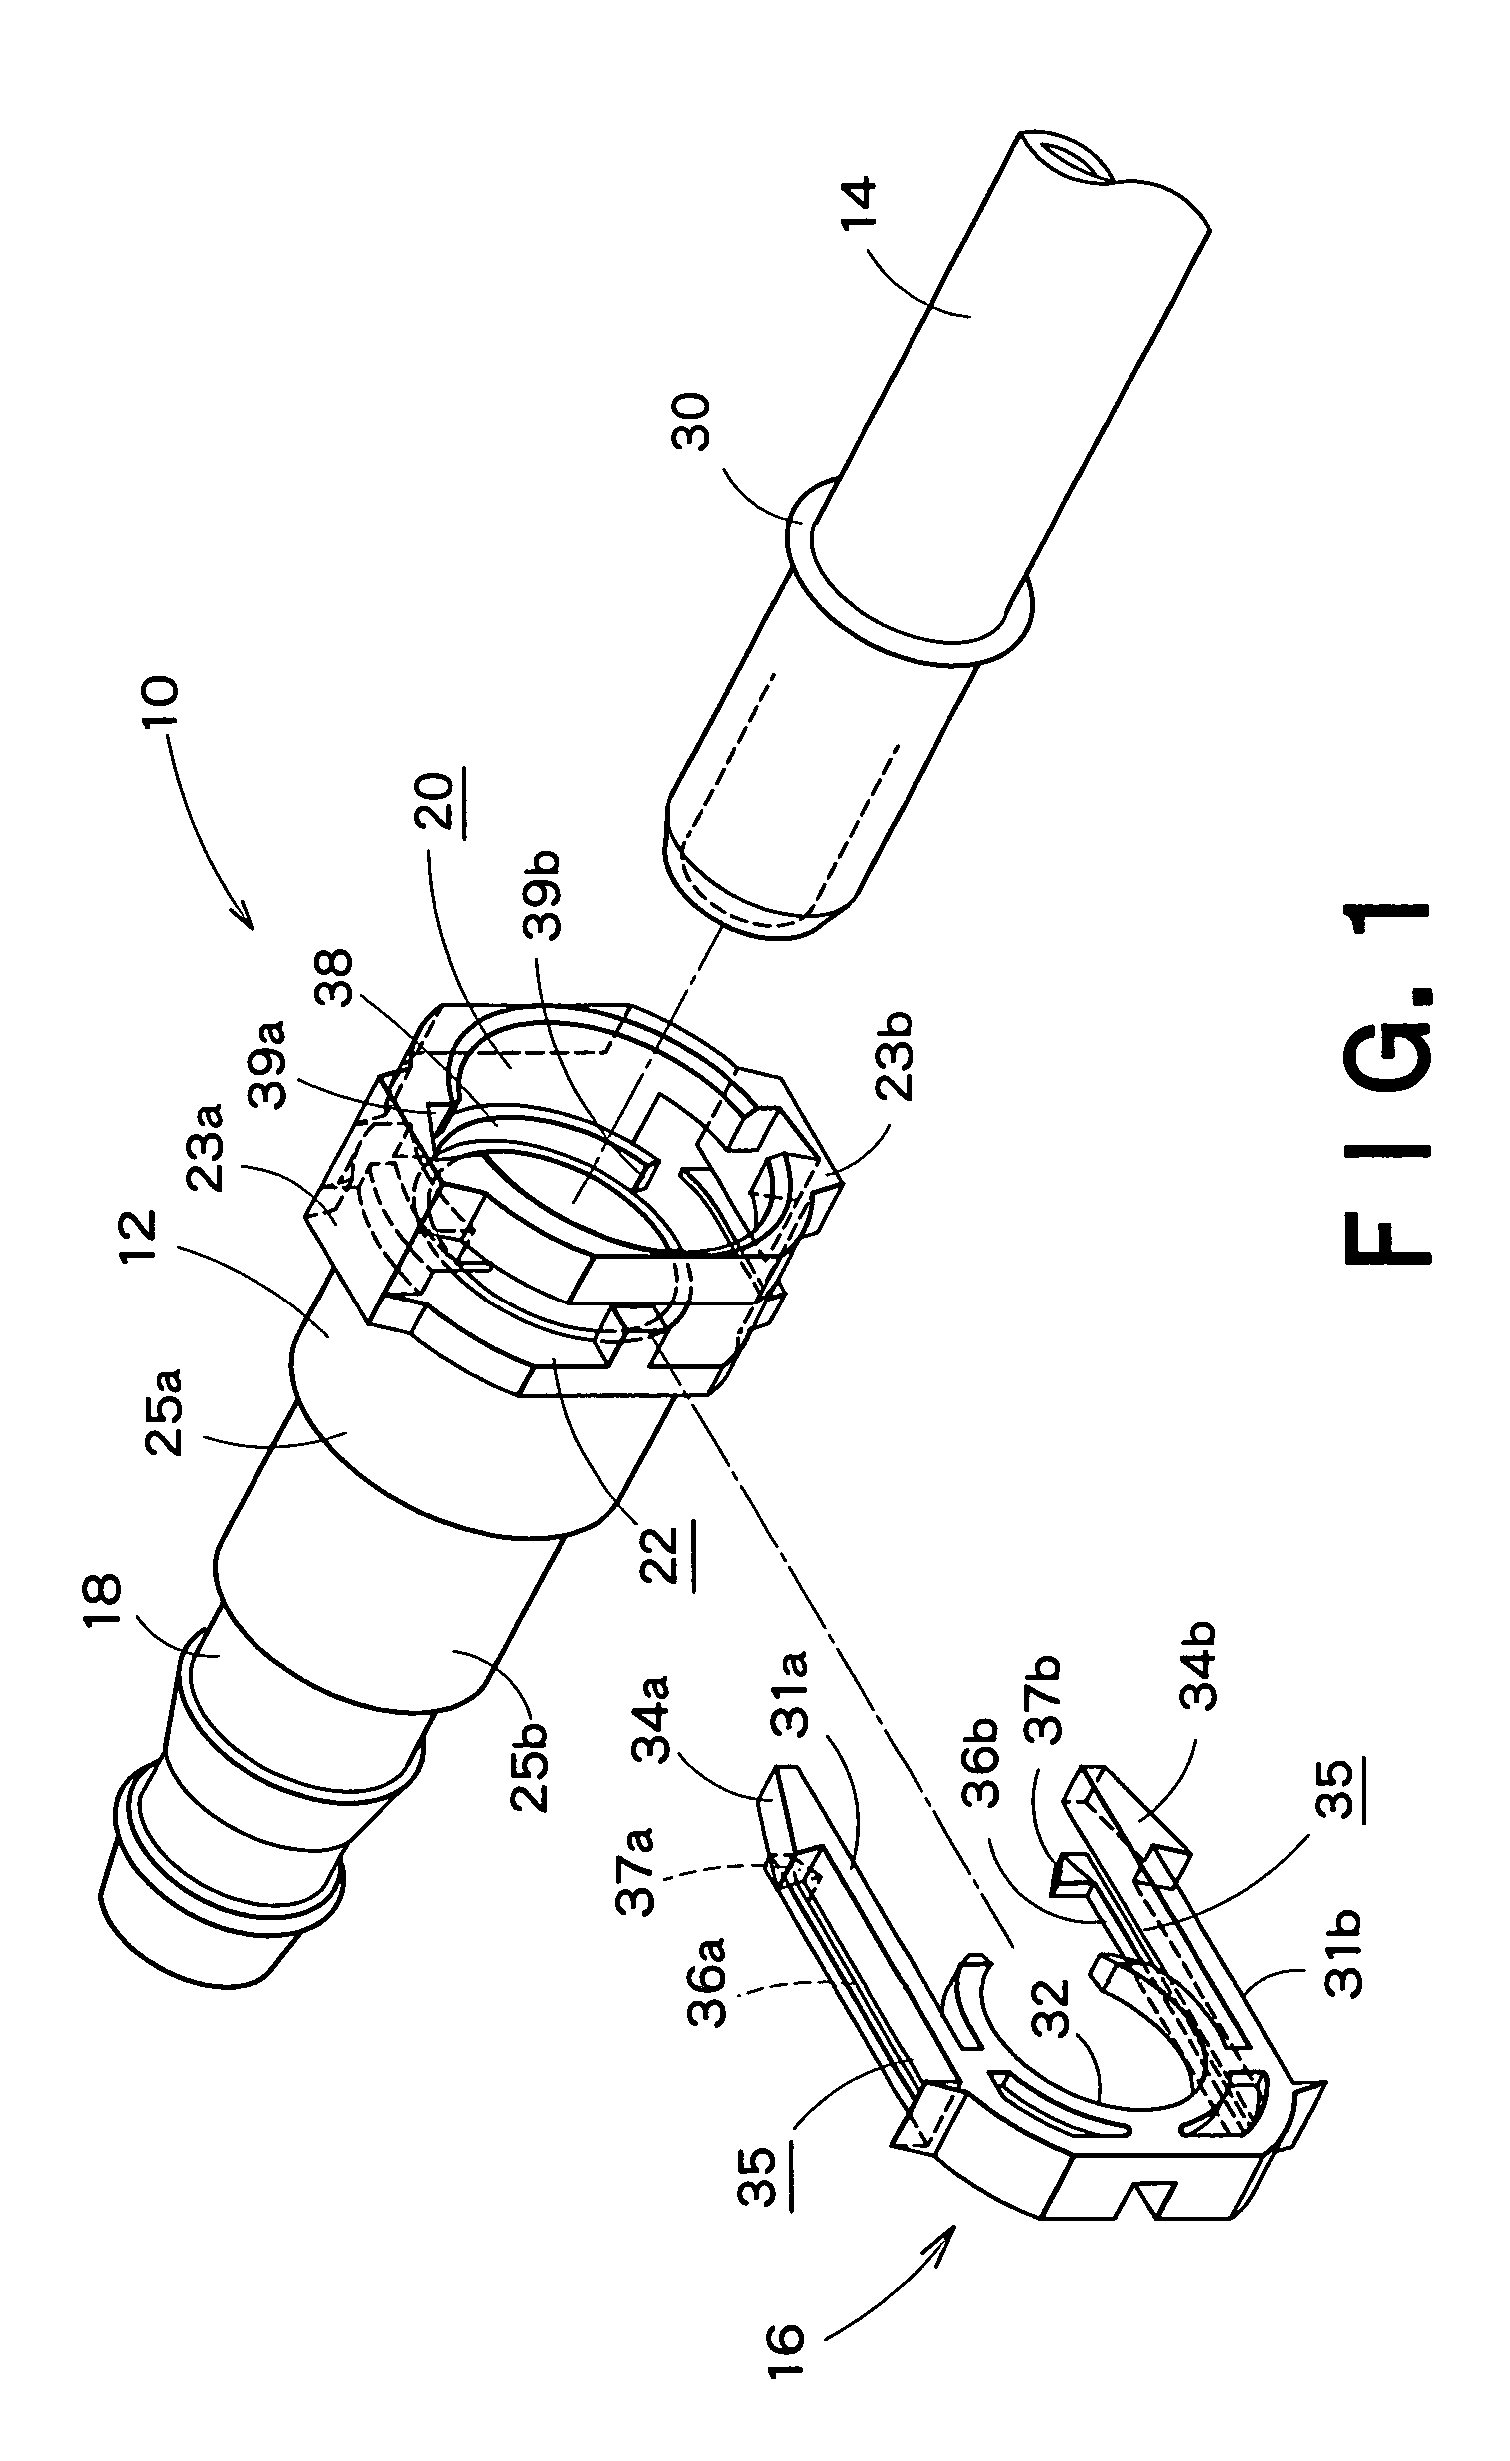 Quick-connect coupling